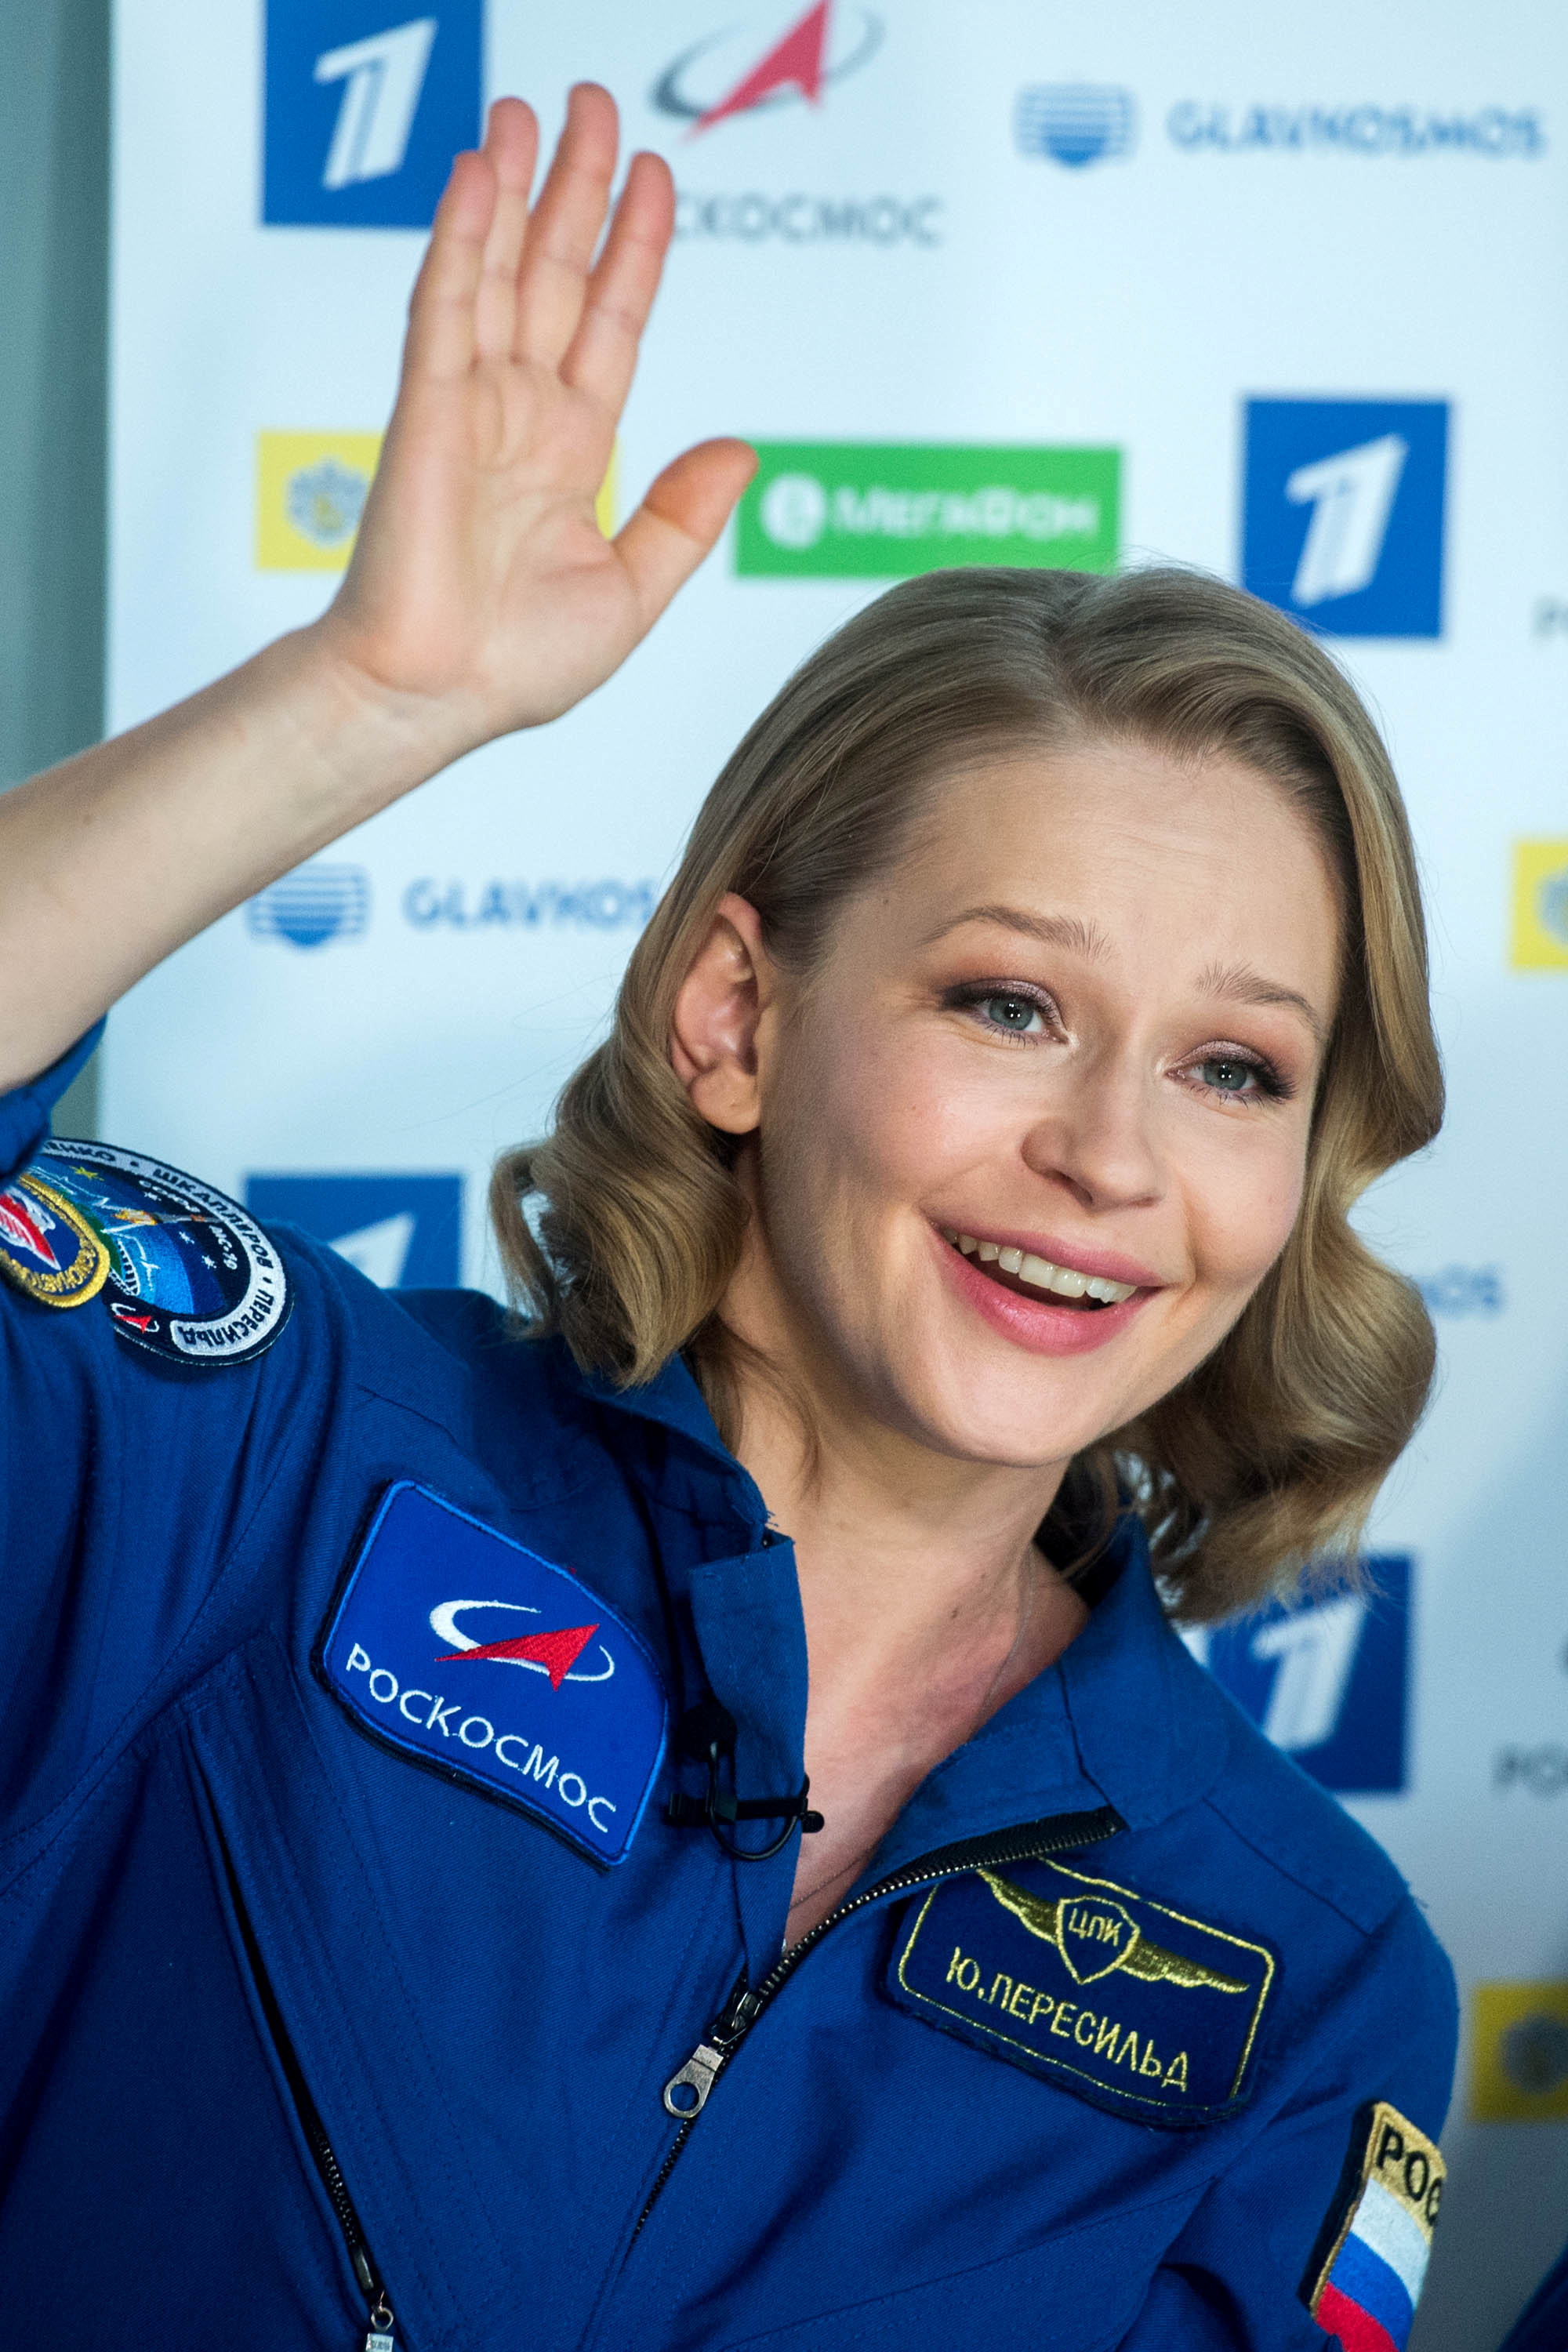 Actress Yulia Peresild speaks during an online news conference following the return from the International Space Station (ISS) in Star City, Russia October 19, 2021. Andrey Shelepin/GCTC/Roscosmos/Handout via REUTERS